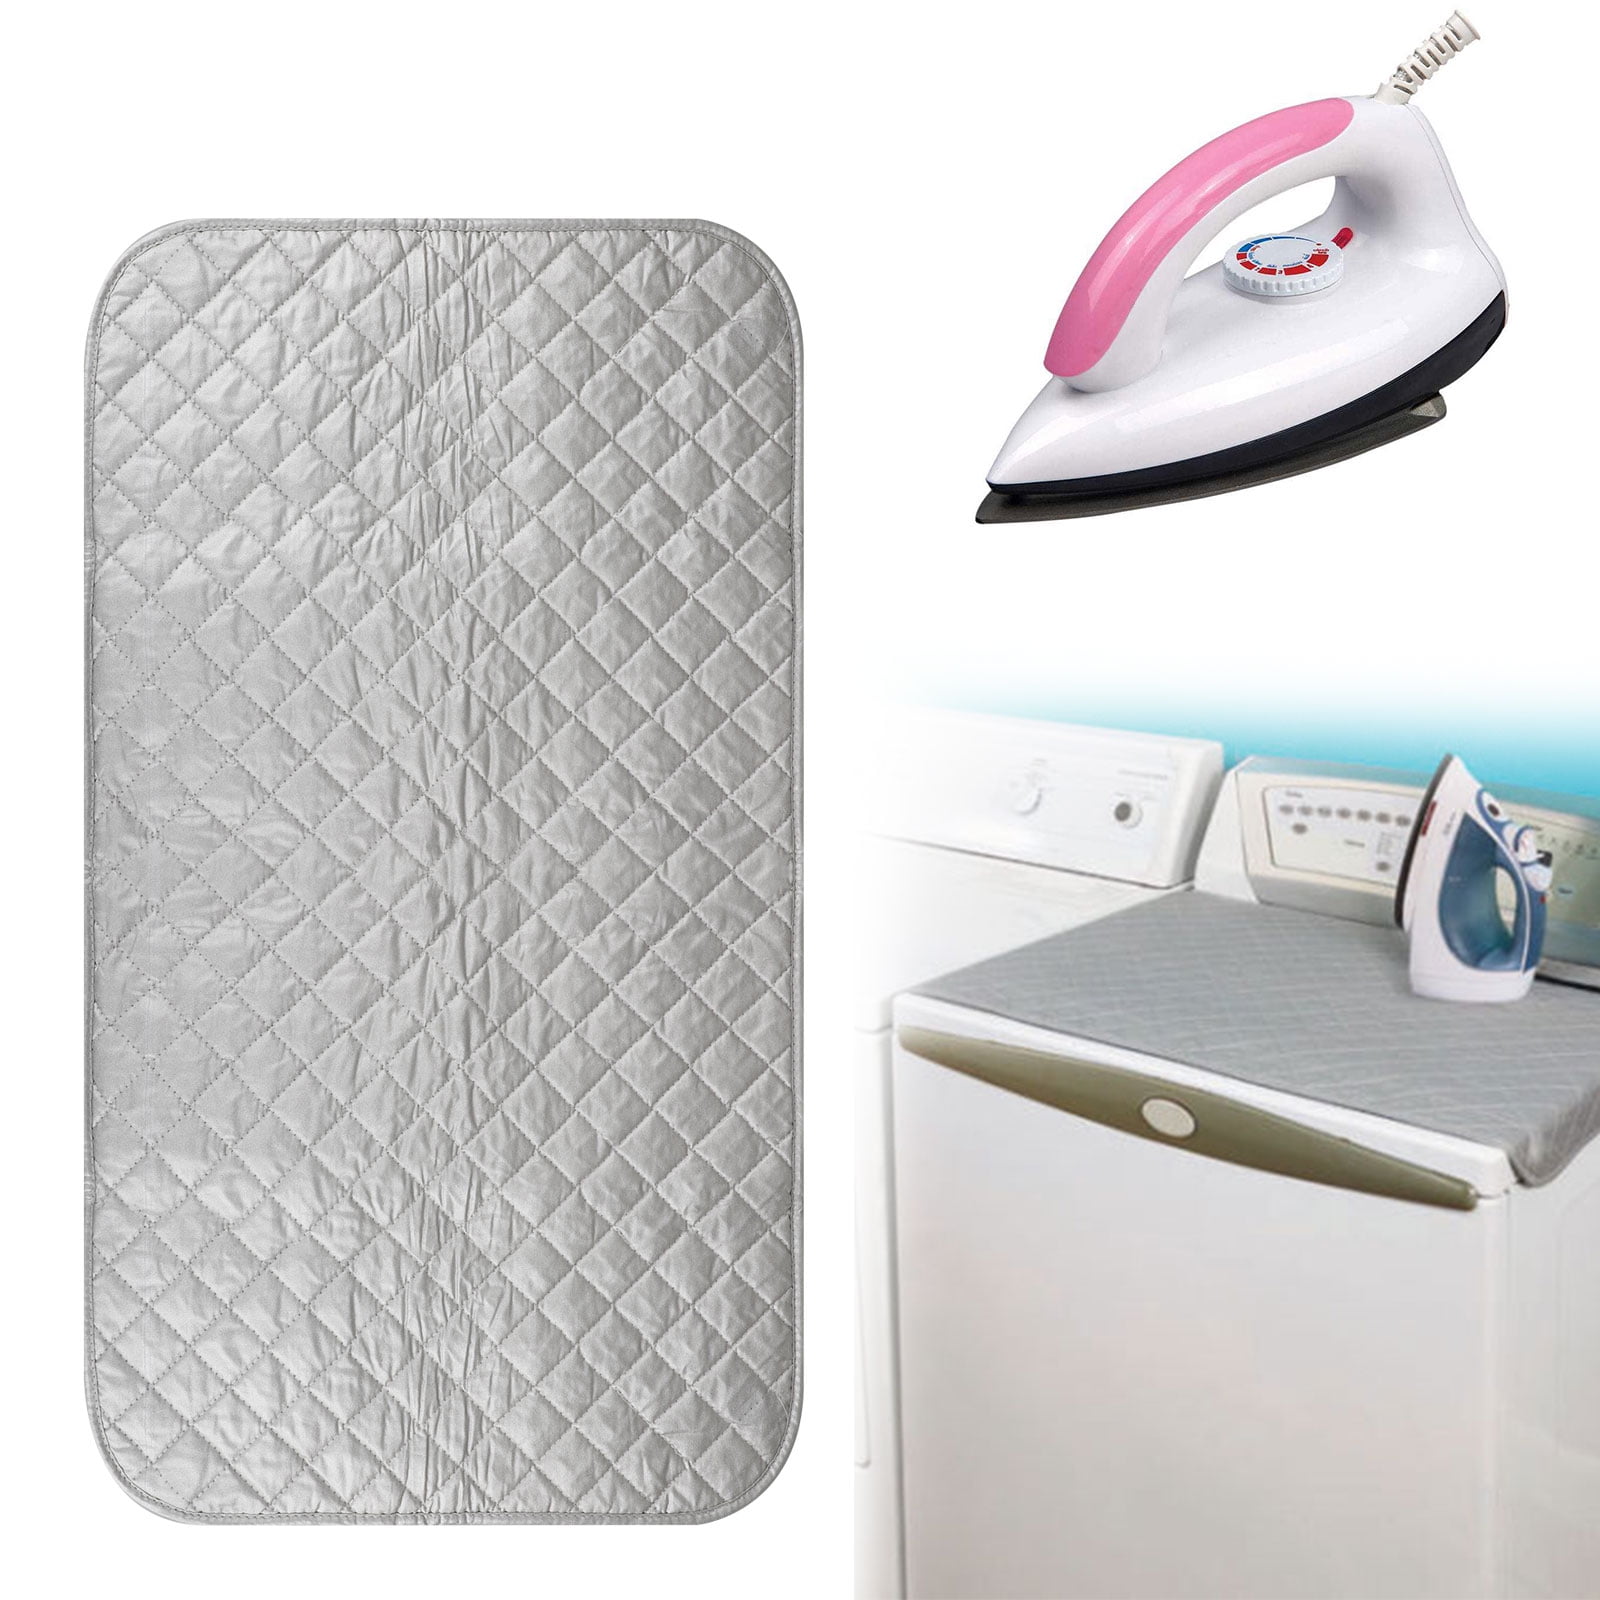 BNYD Portable Ironing Mat Blanket (Iron Anywhere) Ironing Board  Replacement, Iron Board Alternative Cover